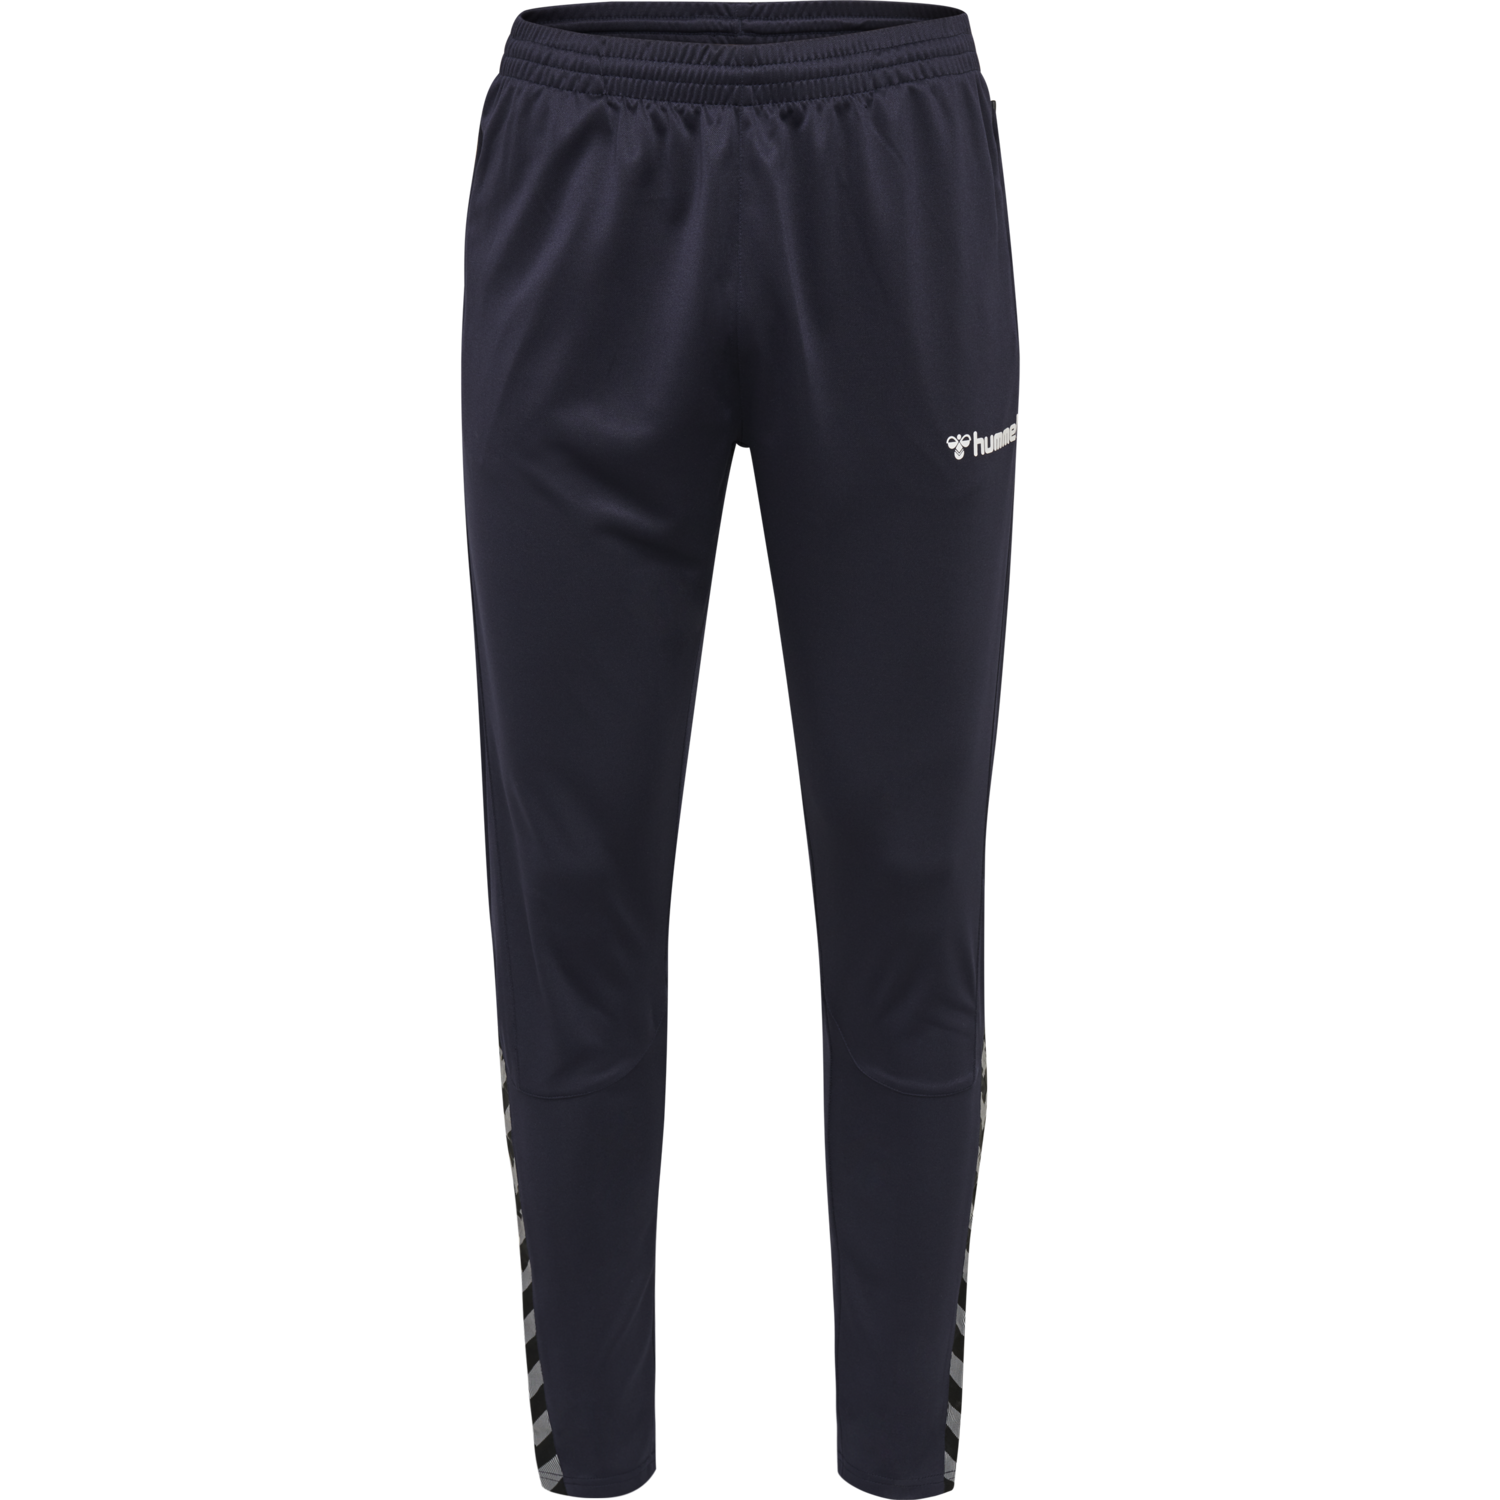 Details about   Jako Football Soccer Sports Kids Training Trousers Pants Tracksuit Bottoms Black 